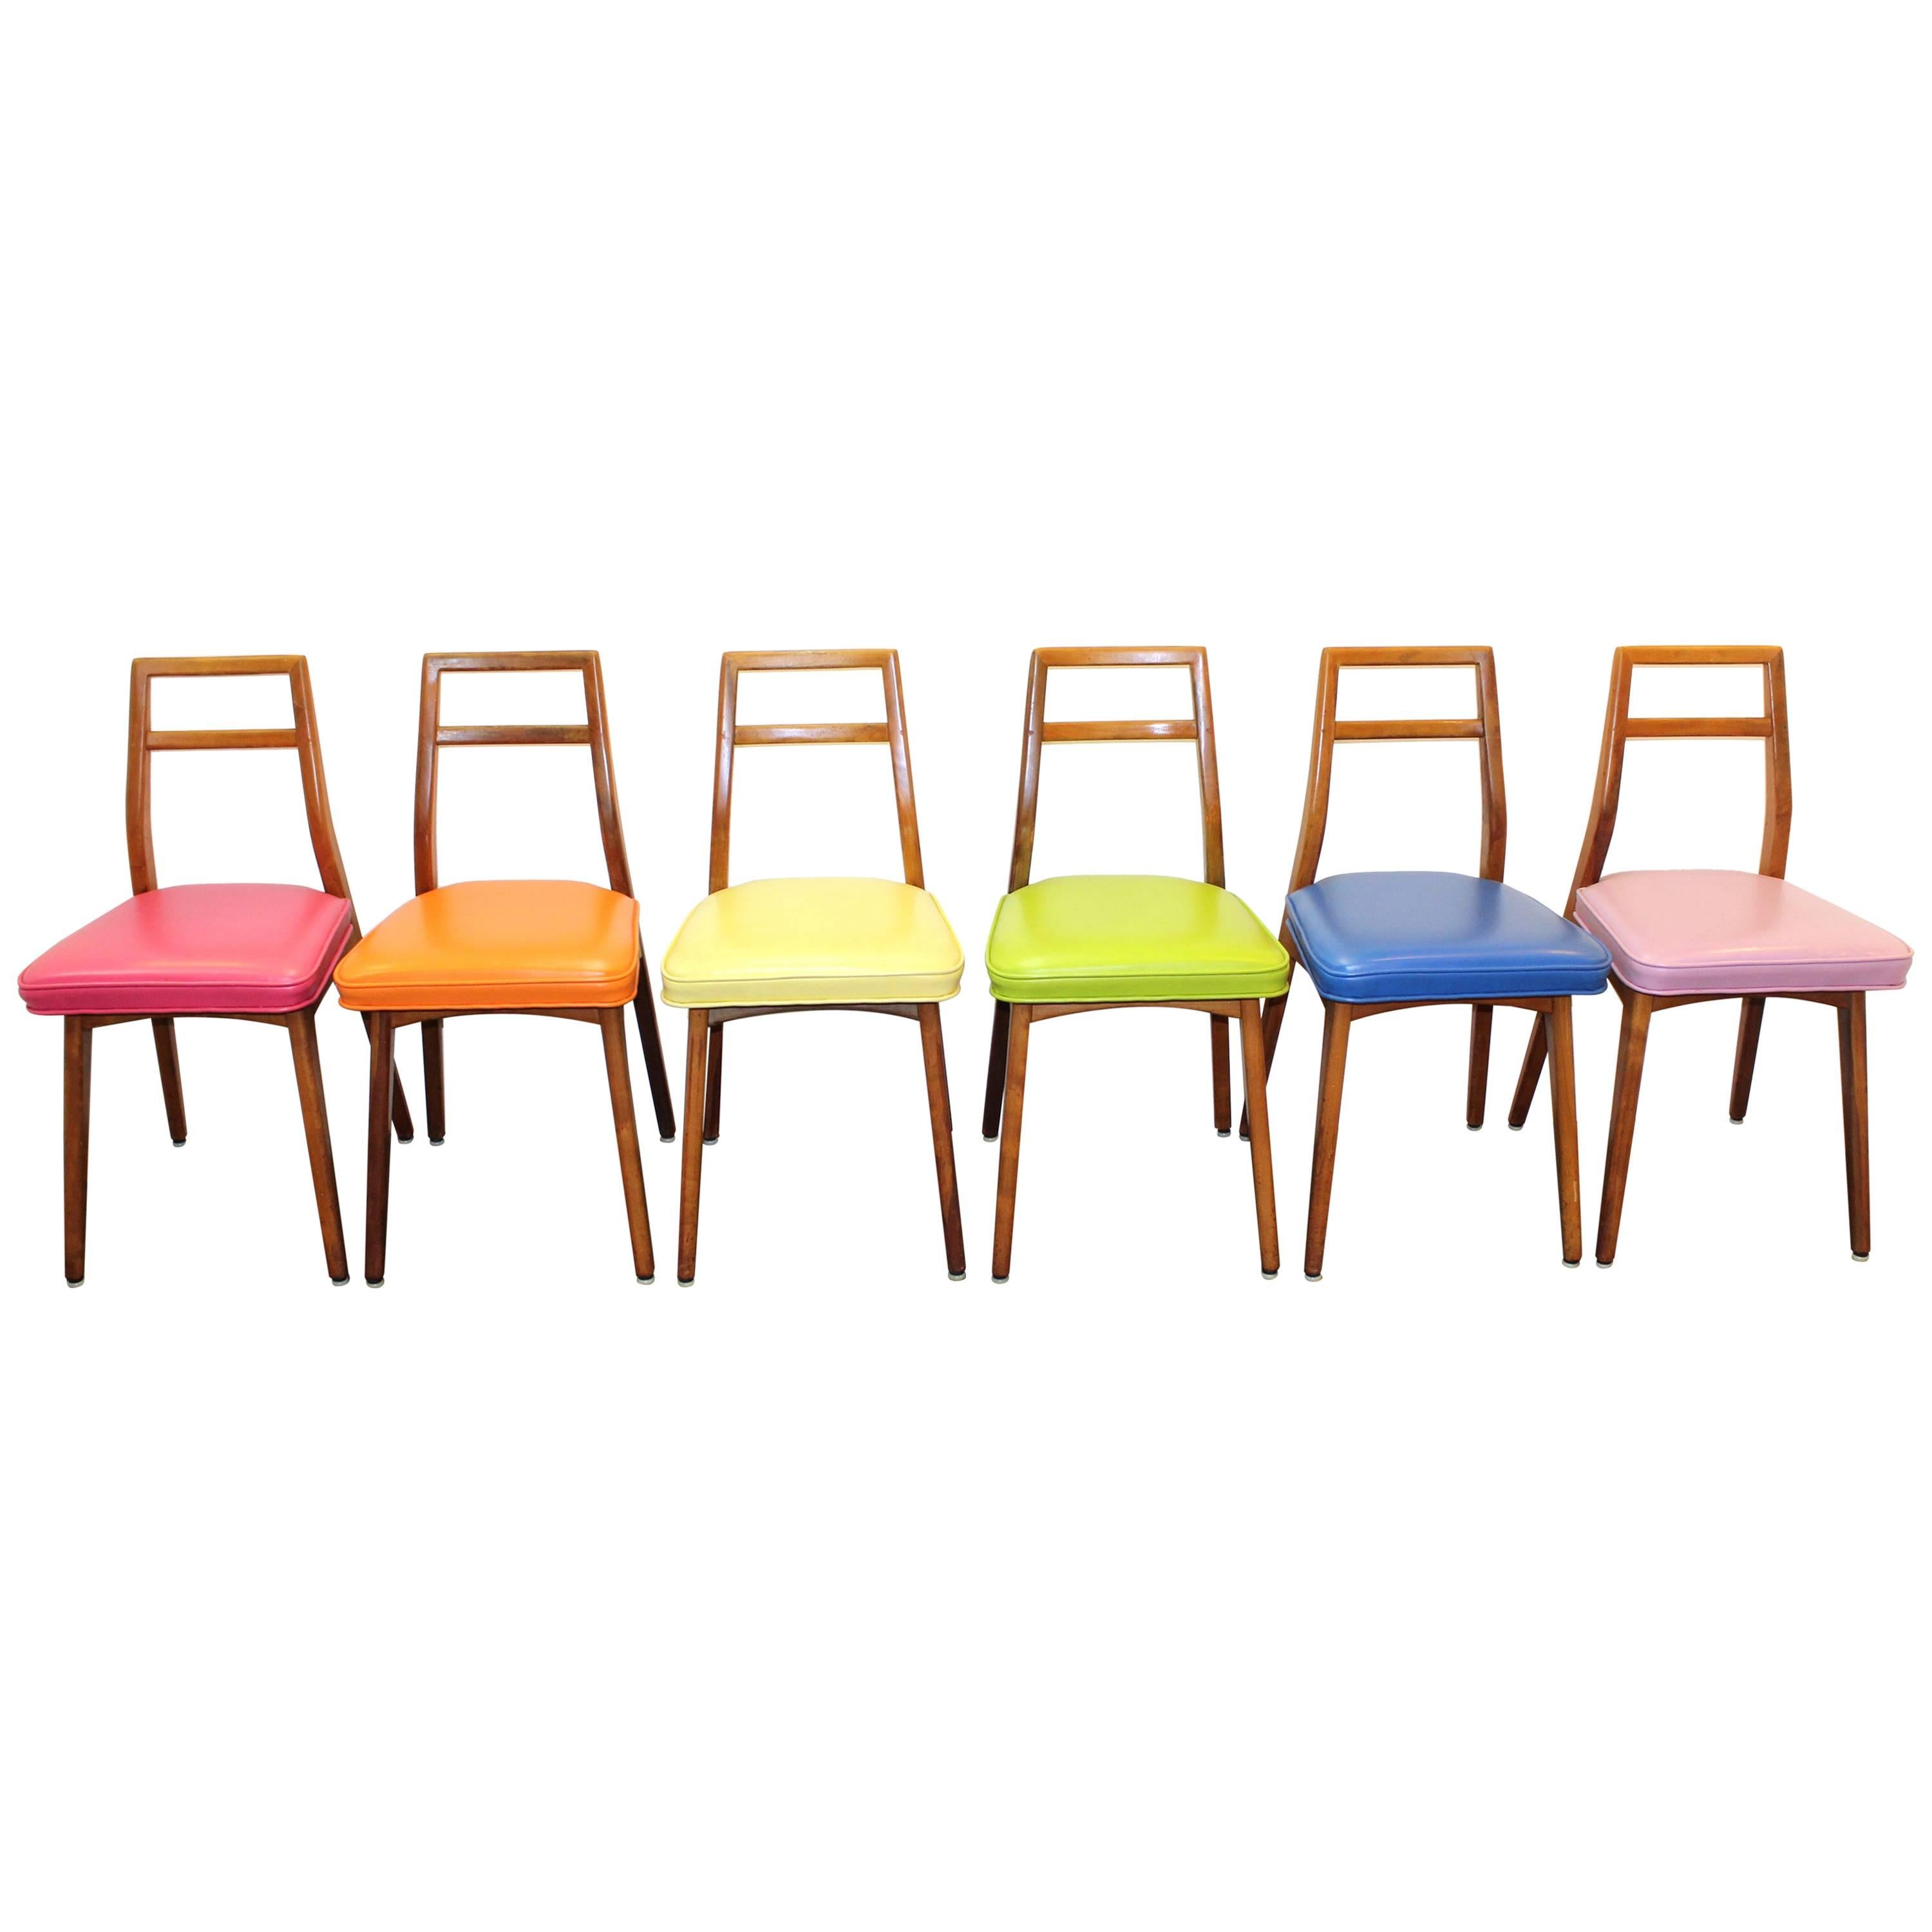 Set of Six Mid-Century Modern Dining Chairs with Colorful Upholstery